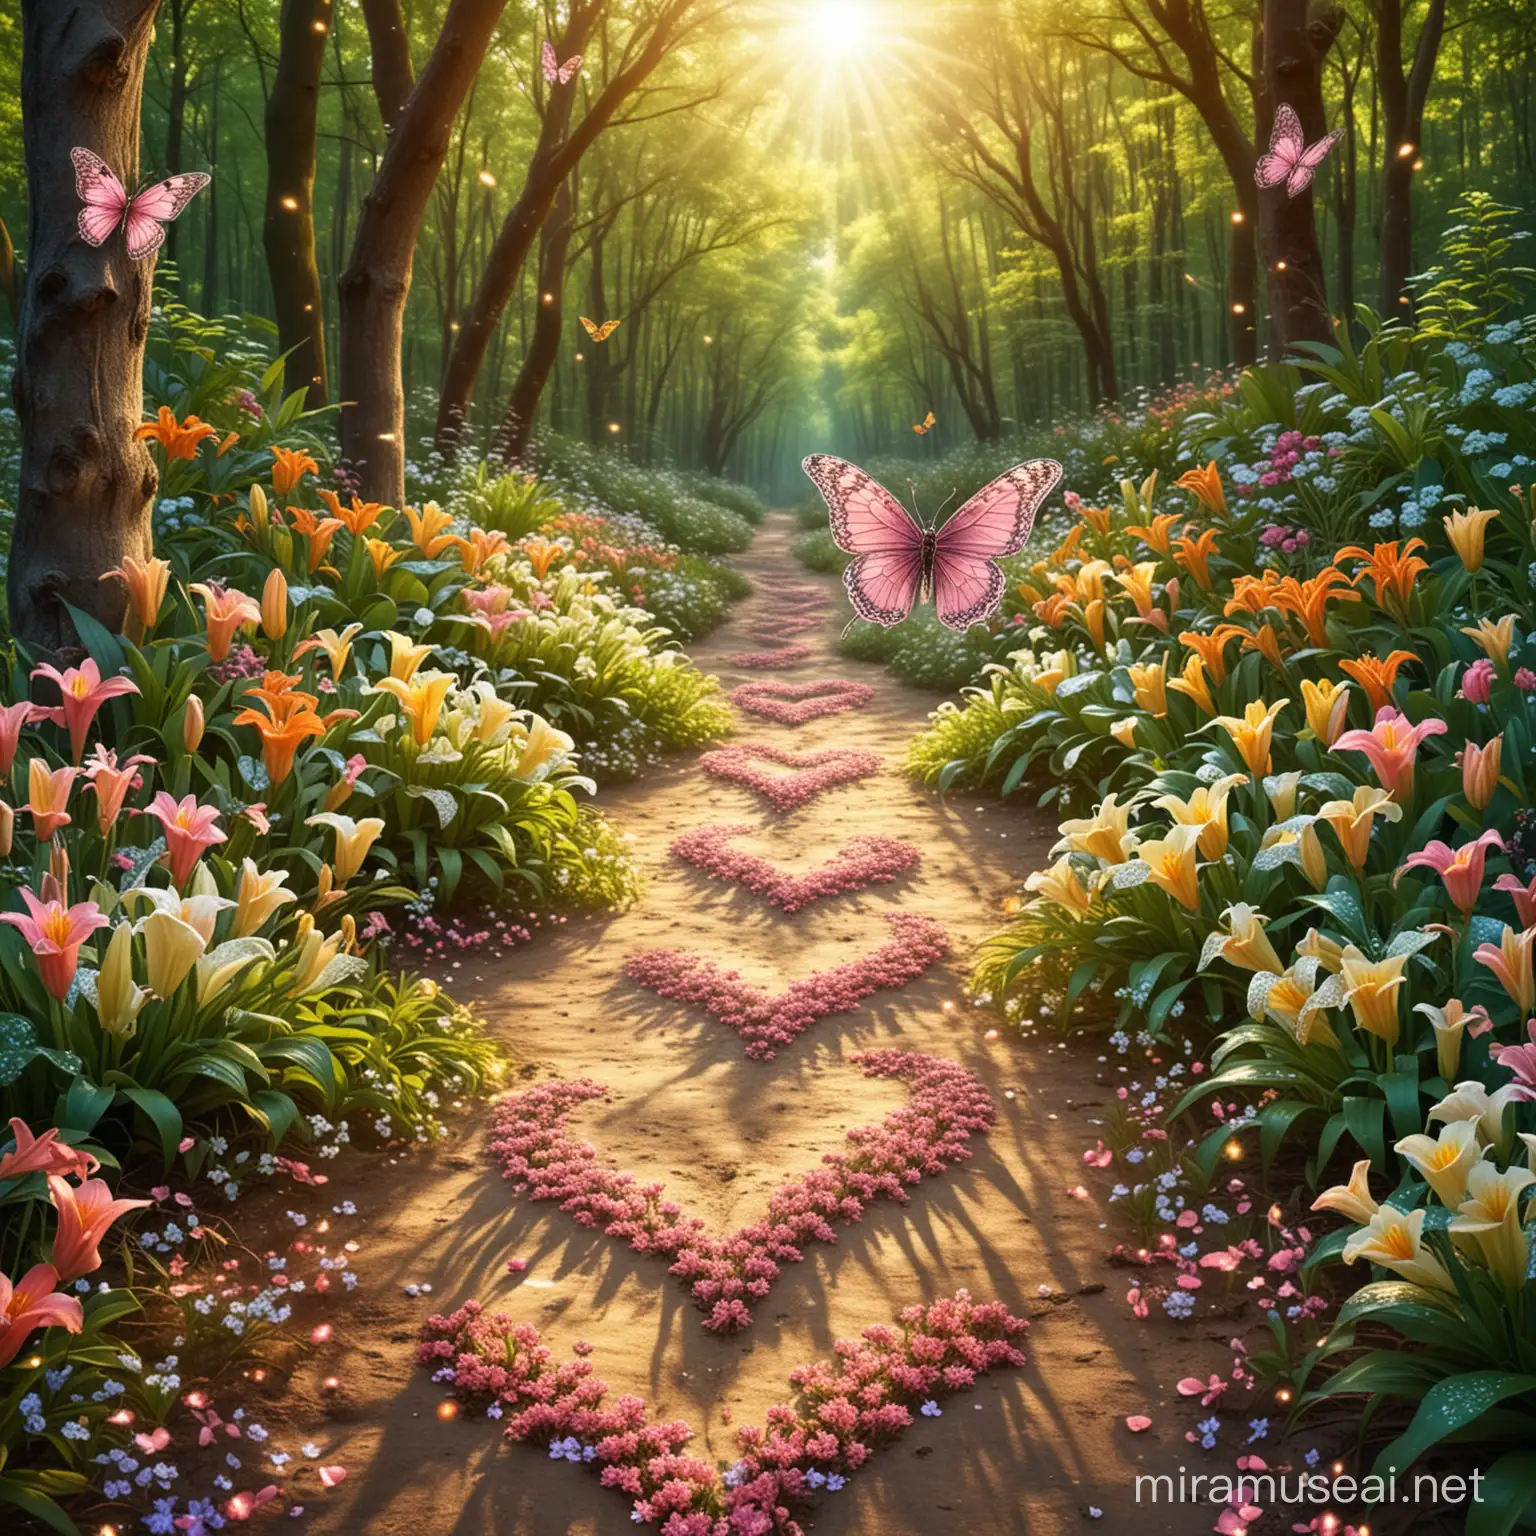 Glittering Heart Path in a Lush Spring Forest with Sun Rays and Delicate Butterflies